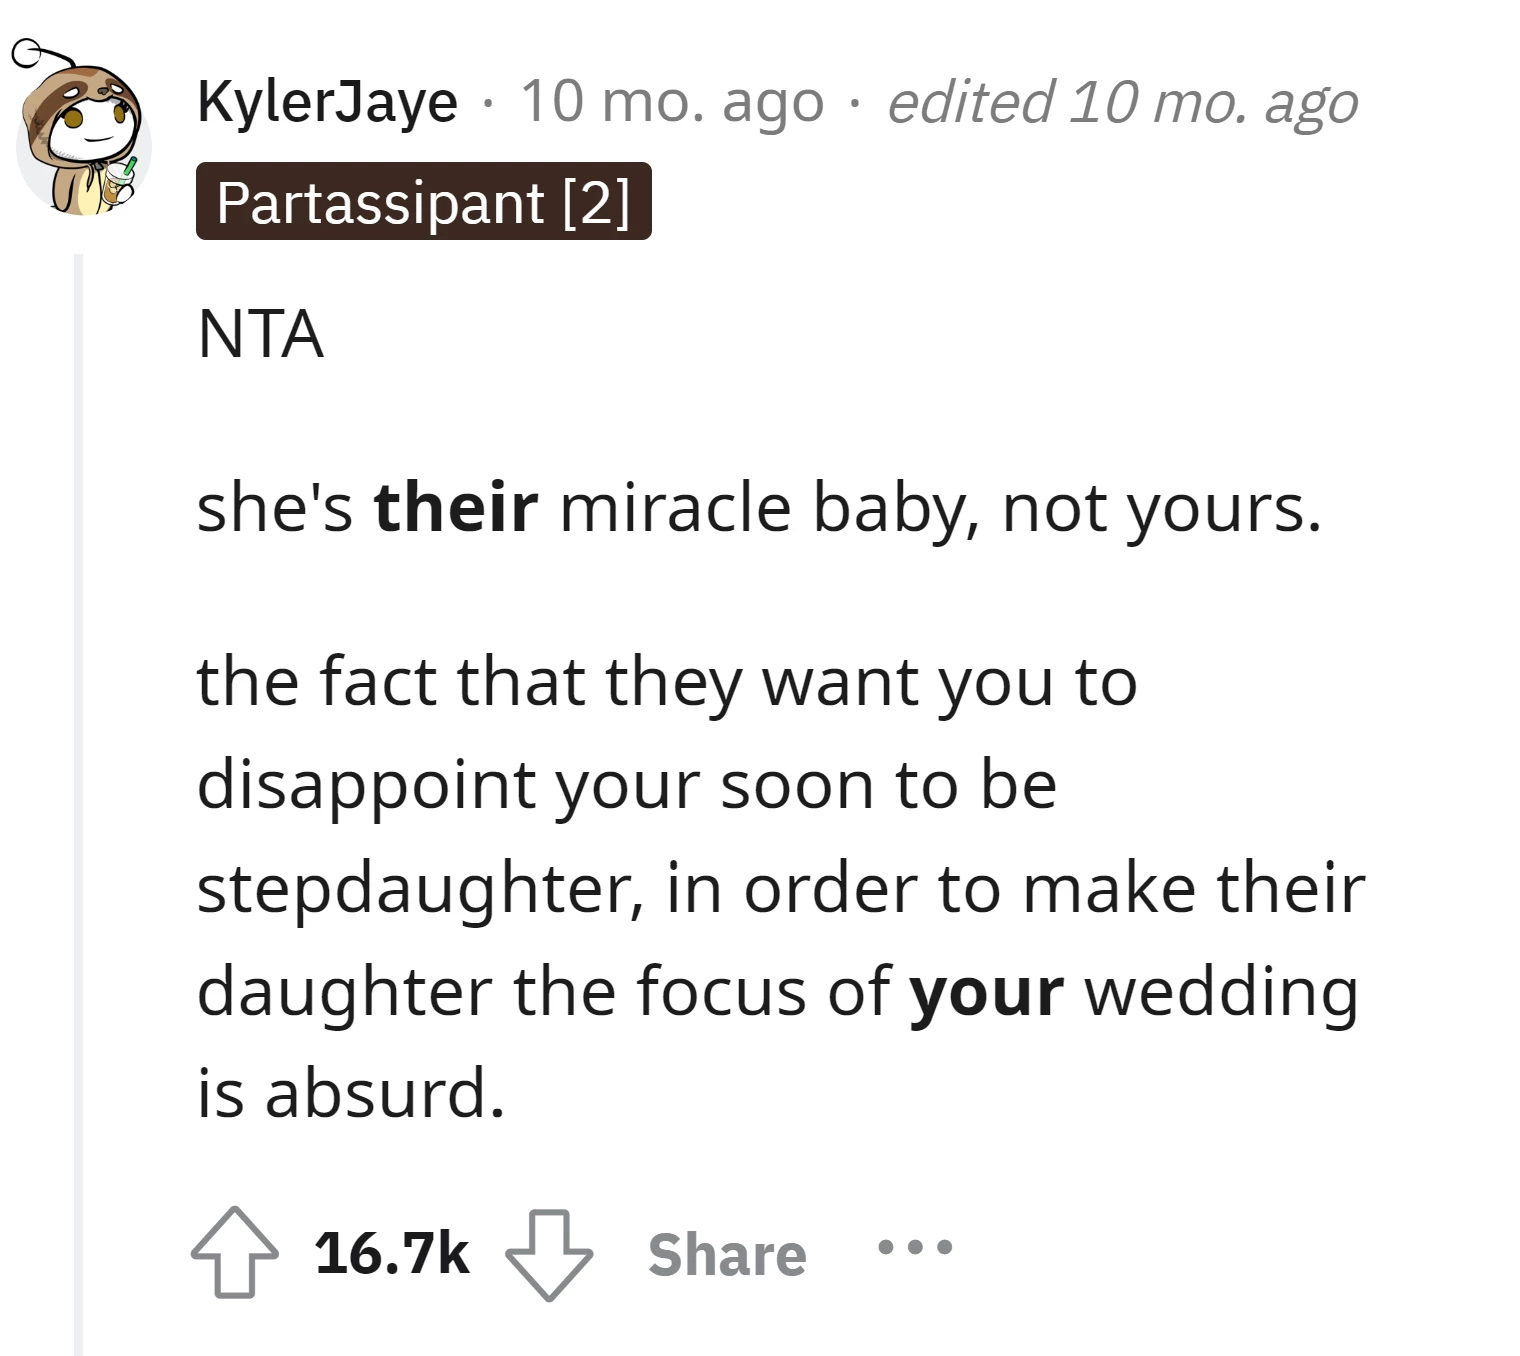 Their Miracle Not Yours, OP